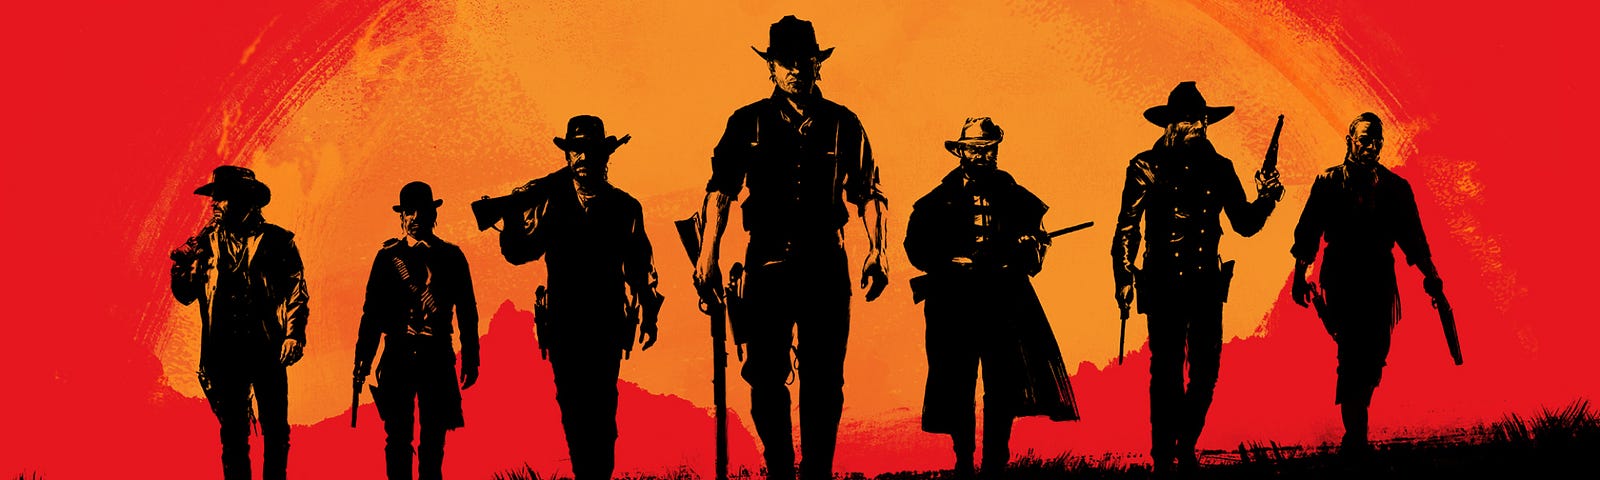 The good, the bad the ugly UX of Red Dead Redemption 2 | by |